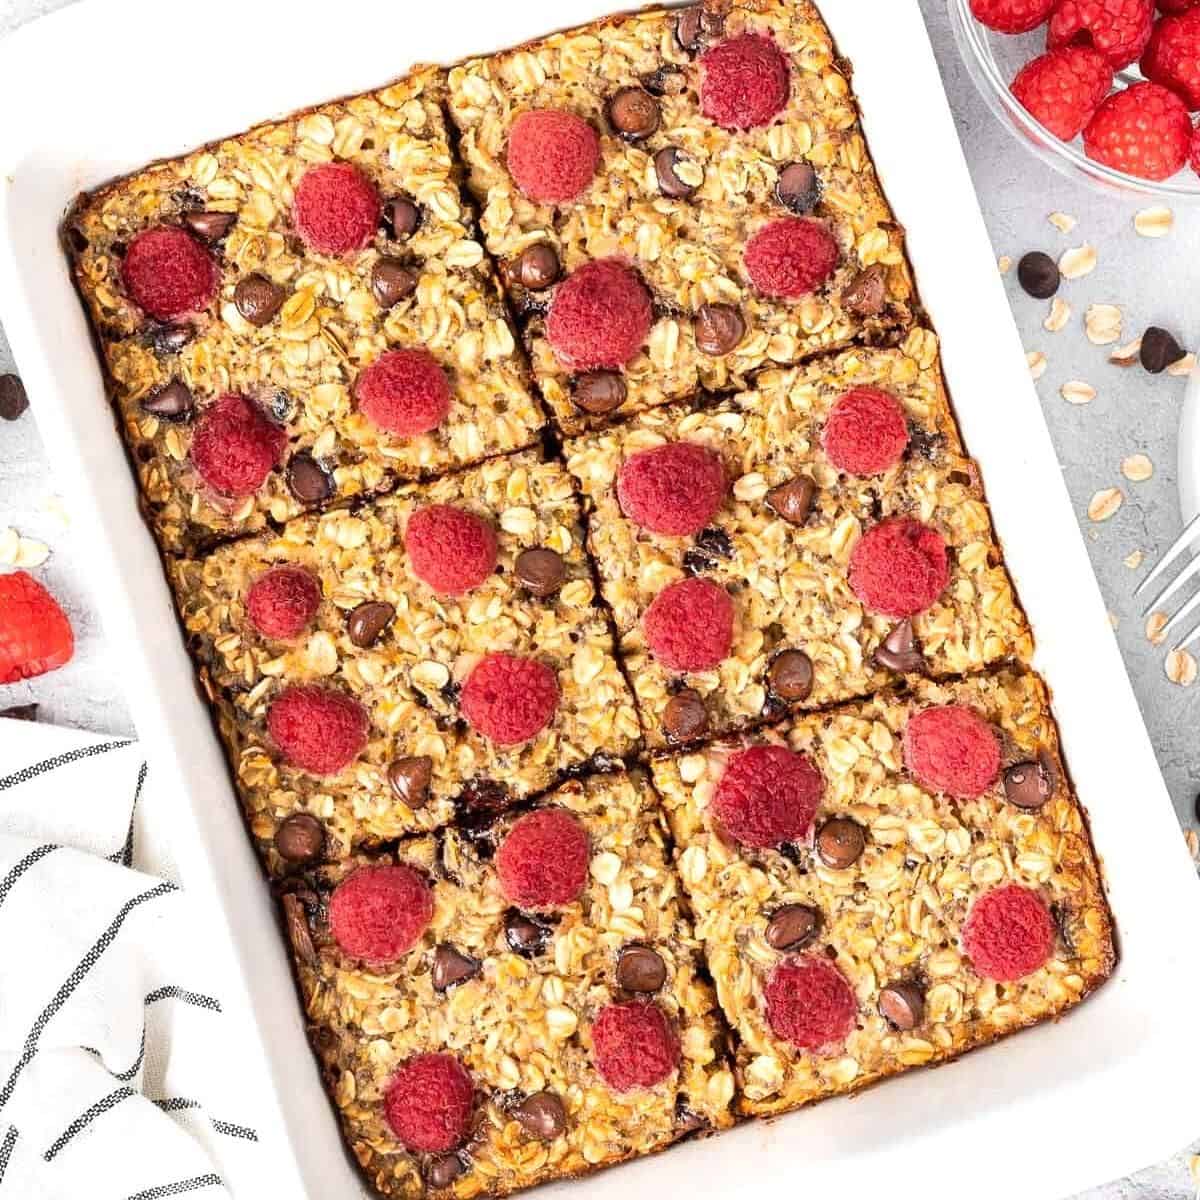 White rectangular dish of baked oatmeal, cut into six pieces.